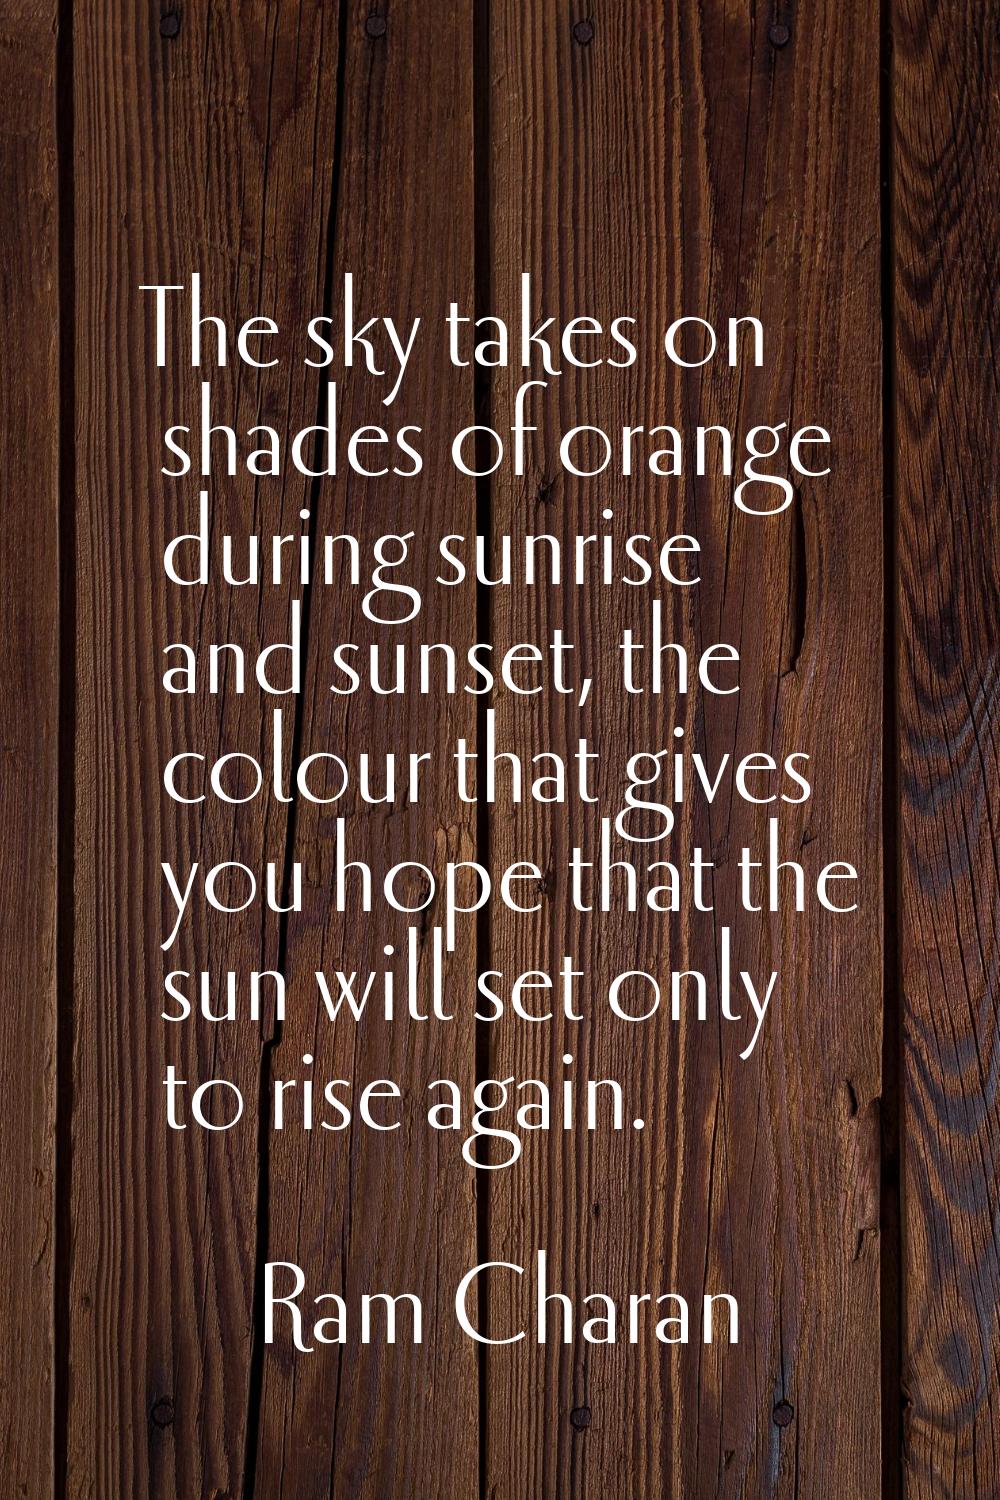 The sky takes on shades of orange during sunrise and sunset, the colour that gives you hope that th